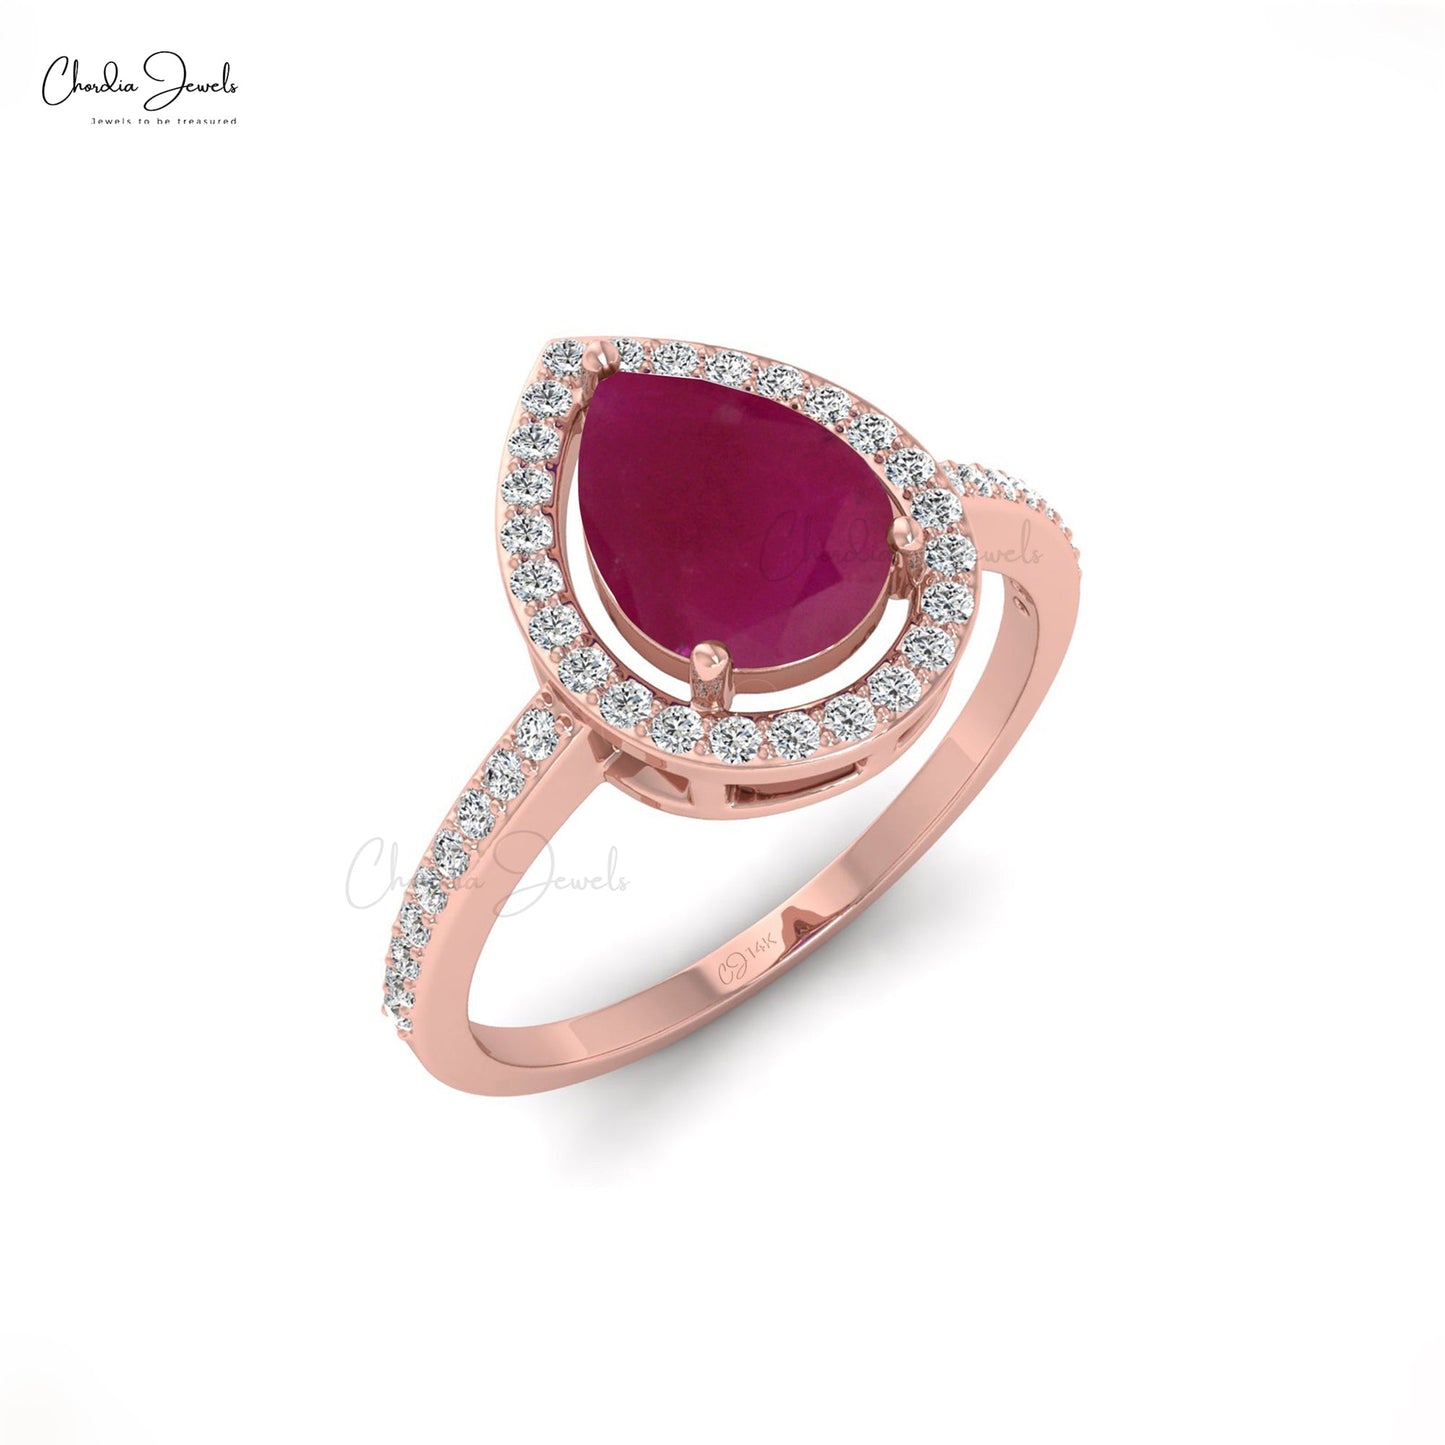 Vintage-Style Ruby Halo Engagement Ring | Exquisite Jewelry for Every  Occasion | FWCJ